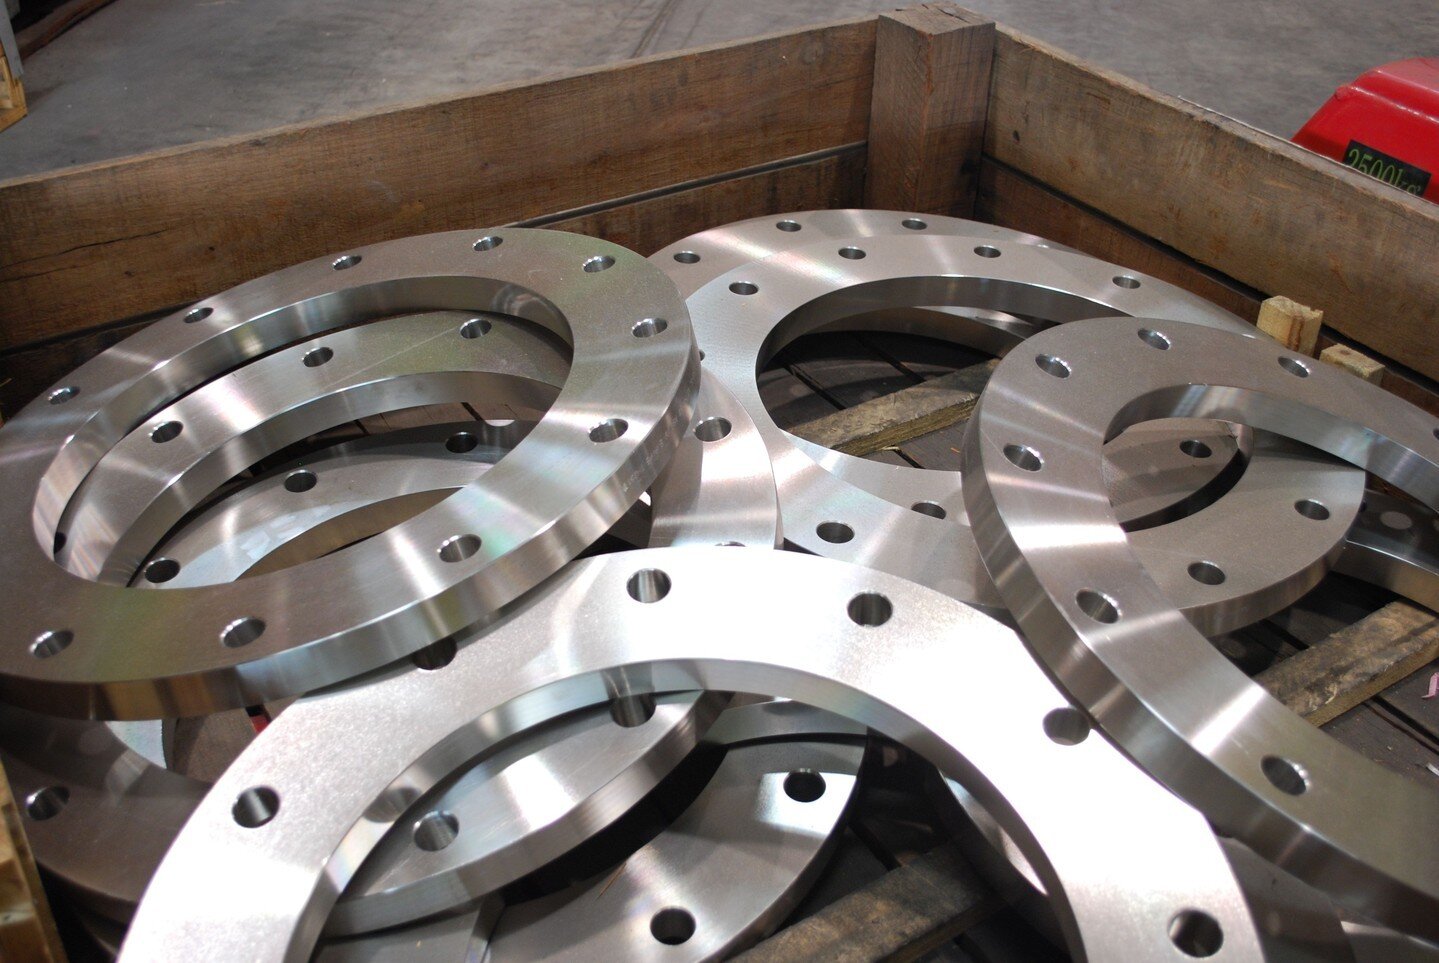 Get the lowdown on Flanges from our new blog going through the different types, including Threaded, Socket-weld, Slip-on and more, the faces, standards and industry uses! 

Check it out on our blog page, link in bio.

#flange #flanges #threadedflange